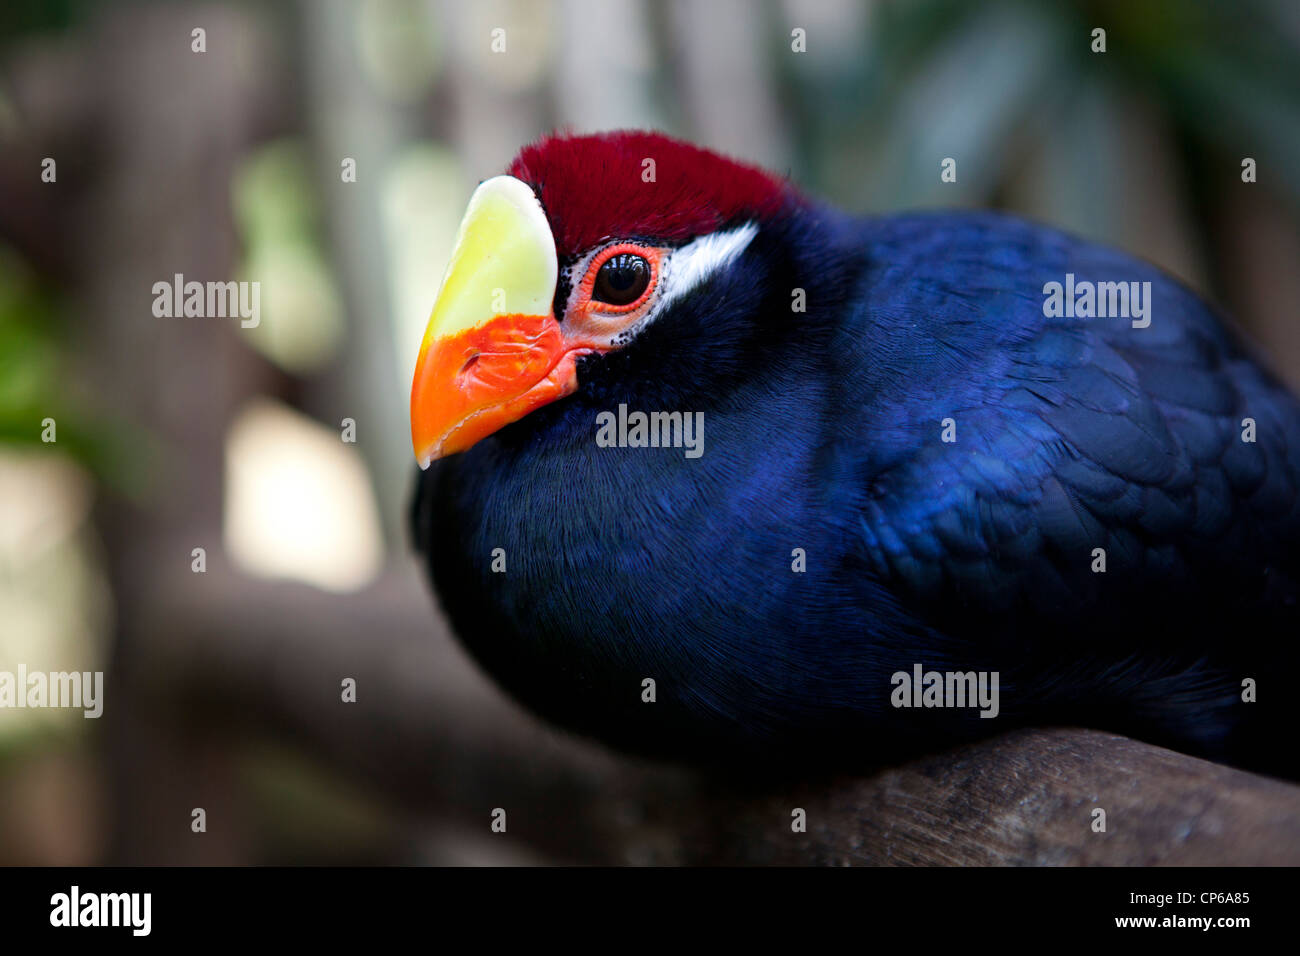 A large blue tropical bird, with red crown and orange and yellow beak, sitting on a wooden fence at Klapmuts, South Africa Stock Photo